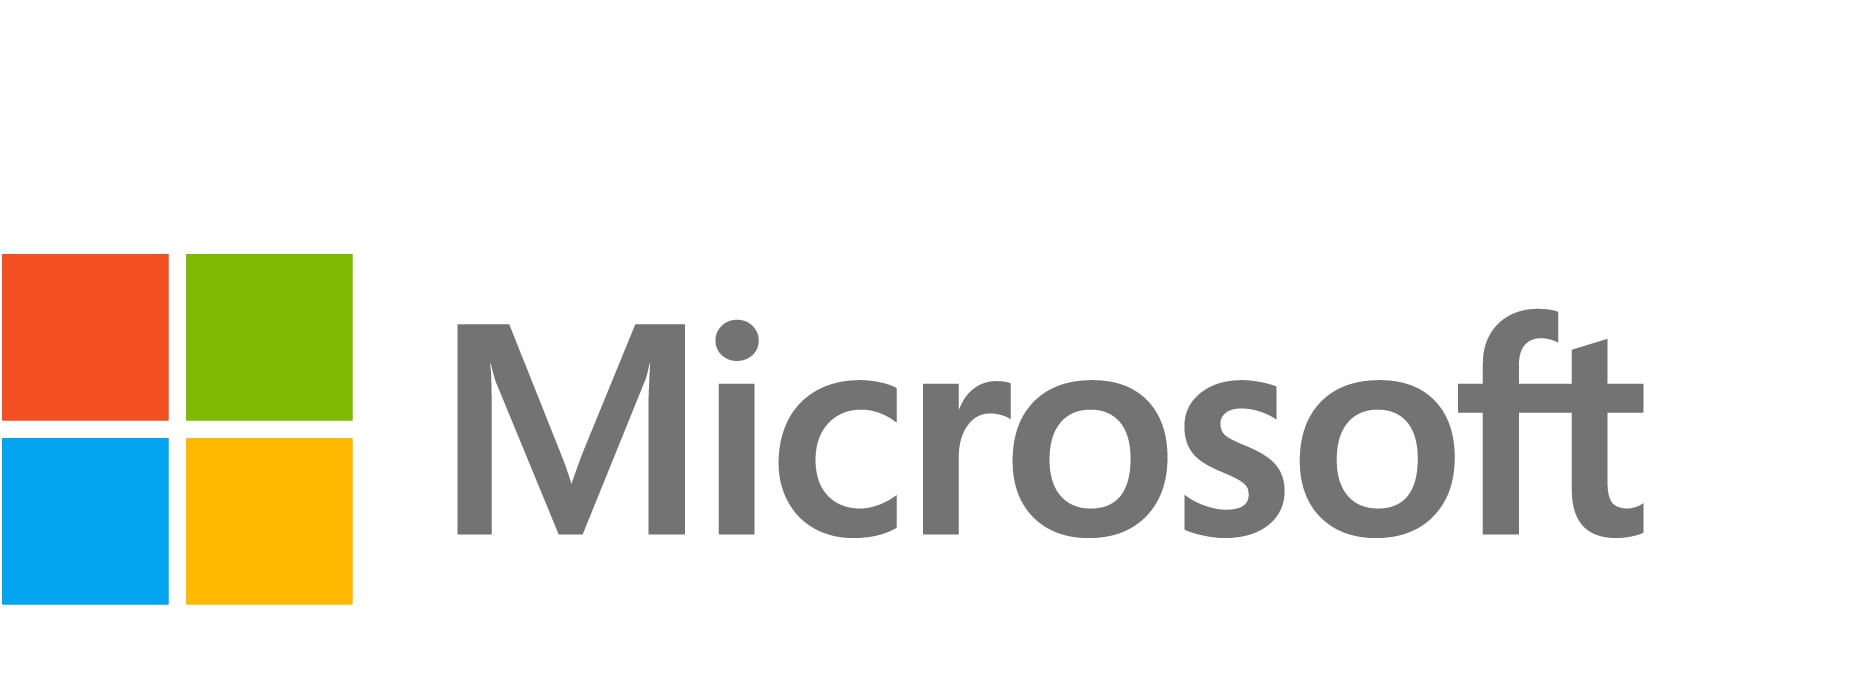 Microsoft Enterprise Mobility + Security A5 - step-up subscription license